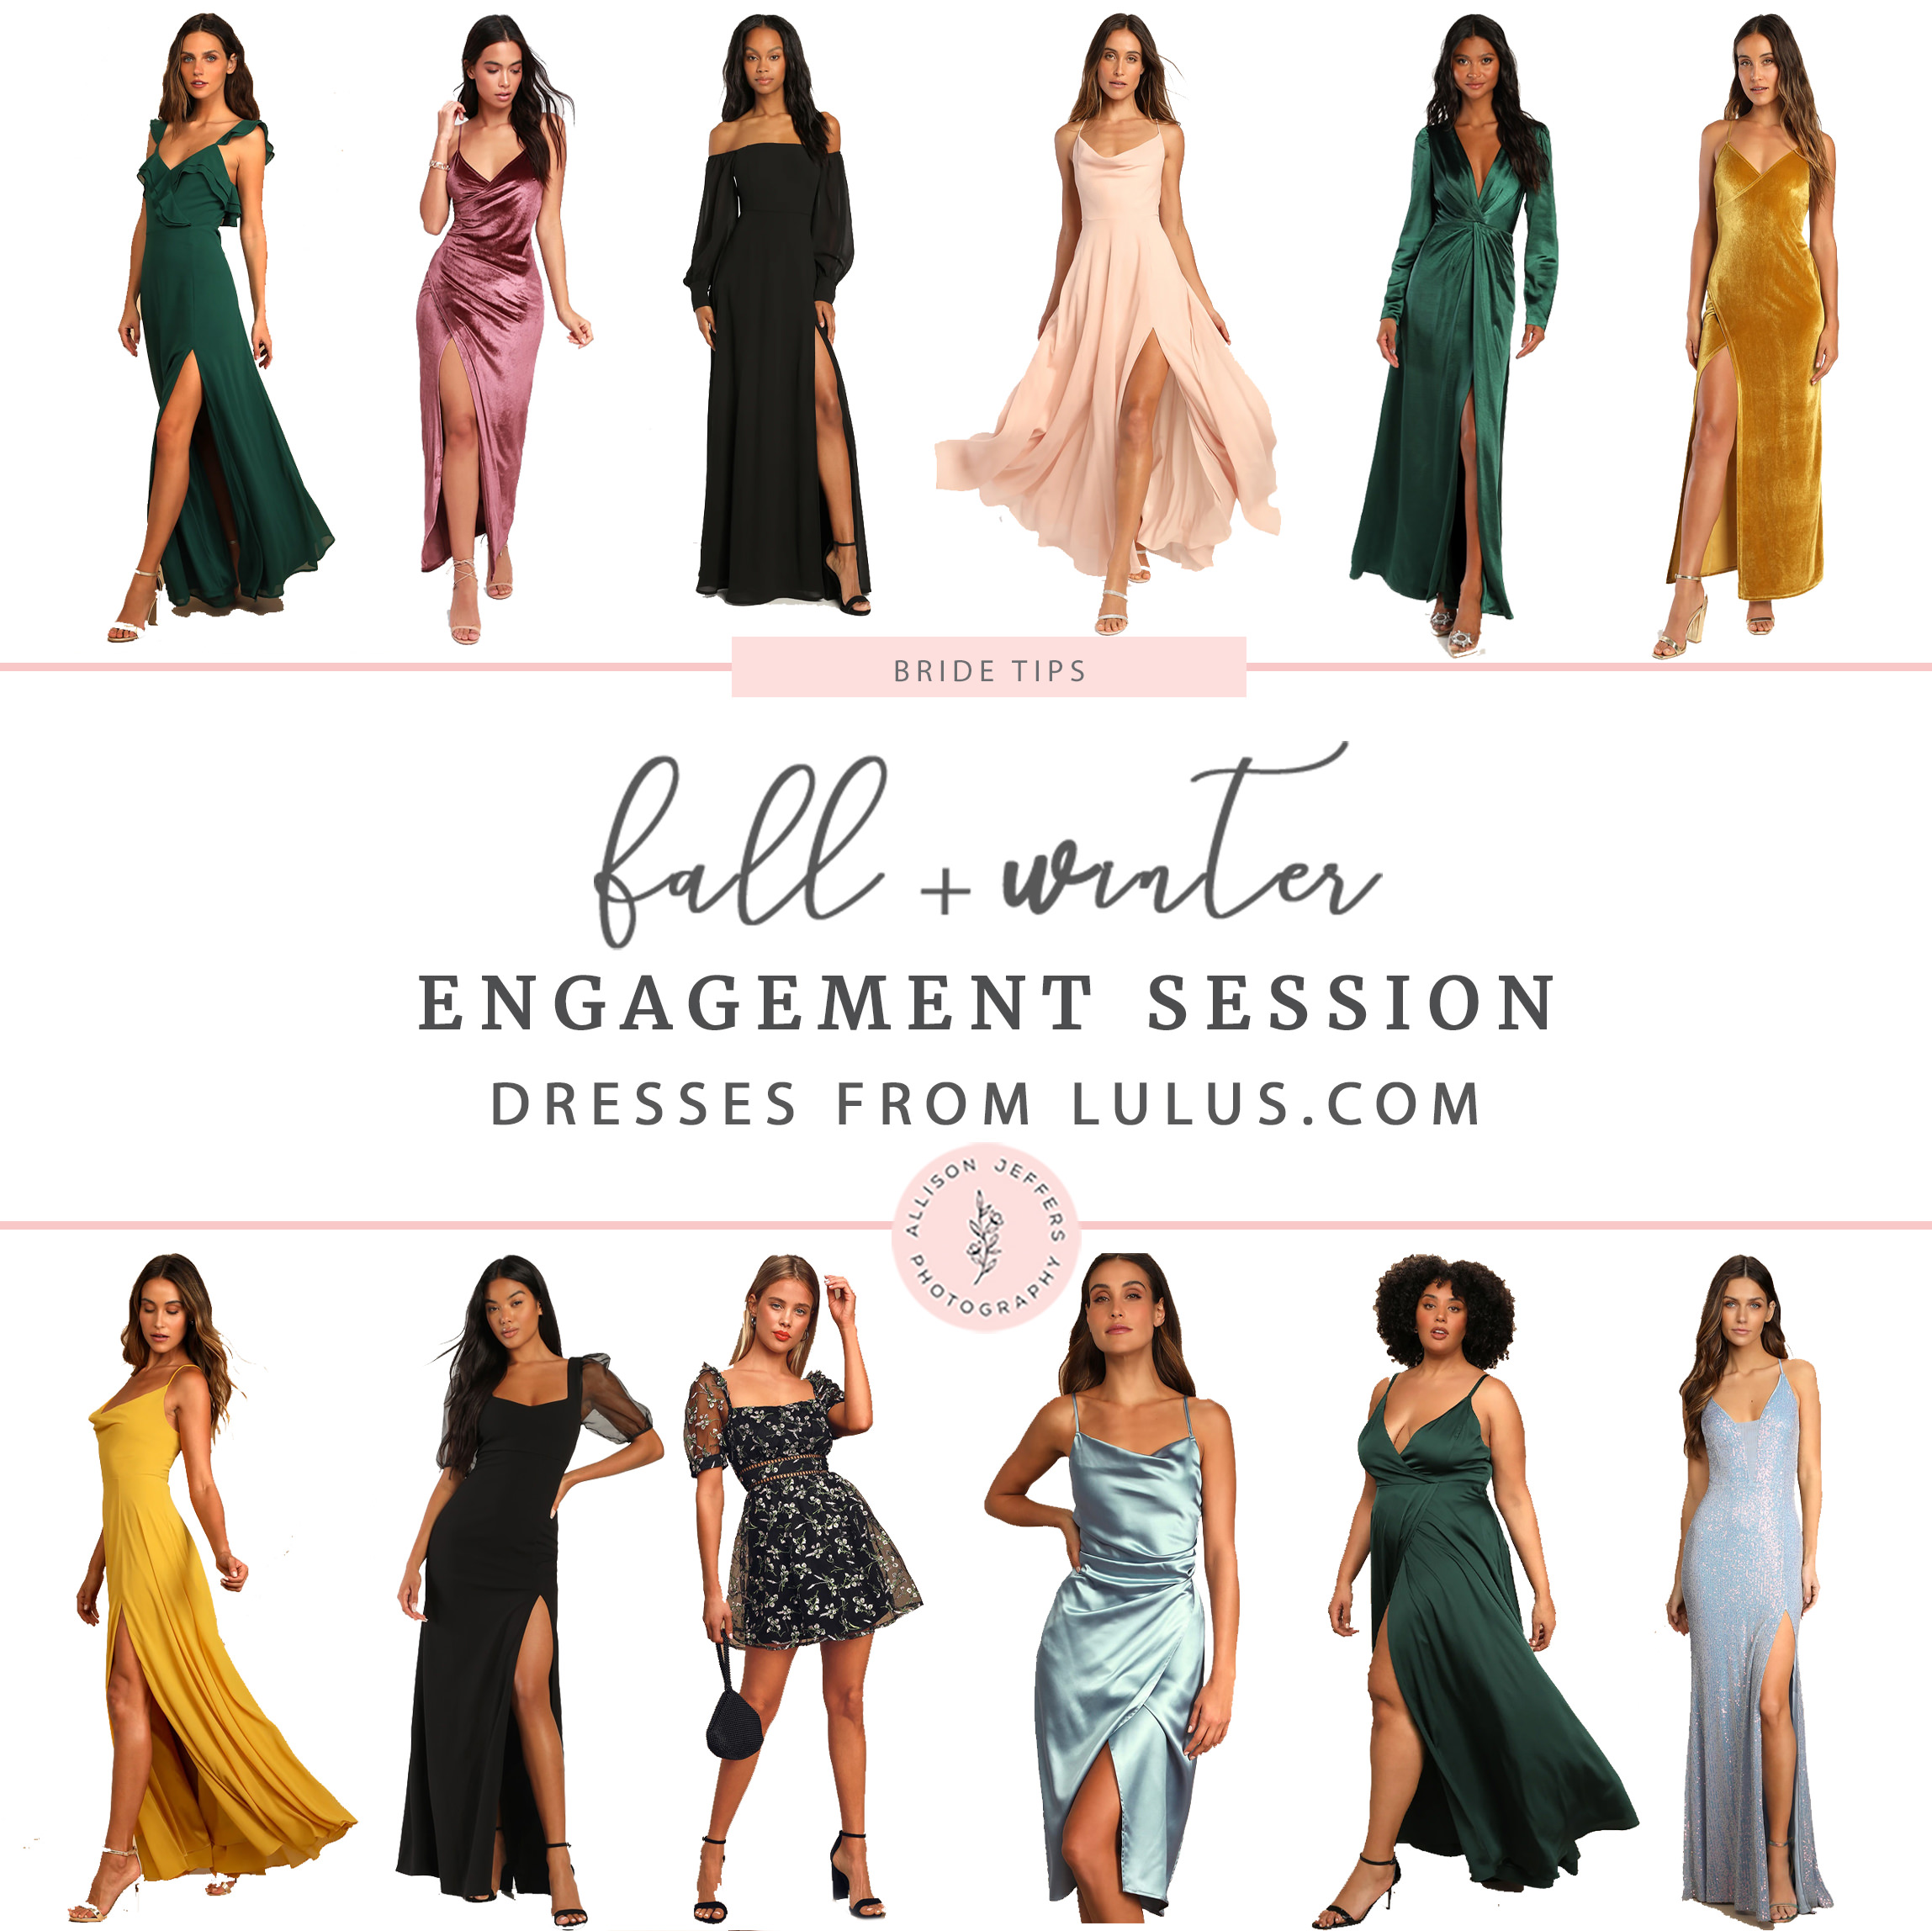 WHAT TO WEAR ENGAGEMENT SESSION supdated copy